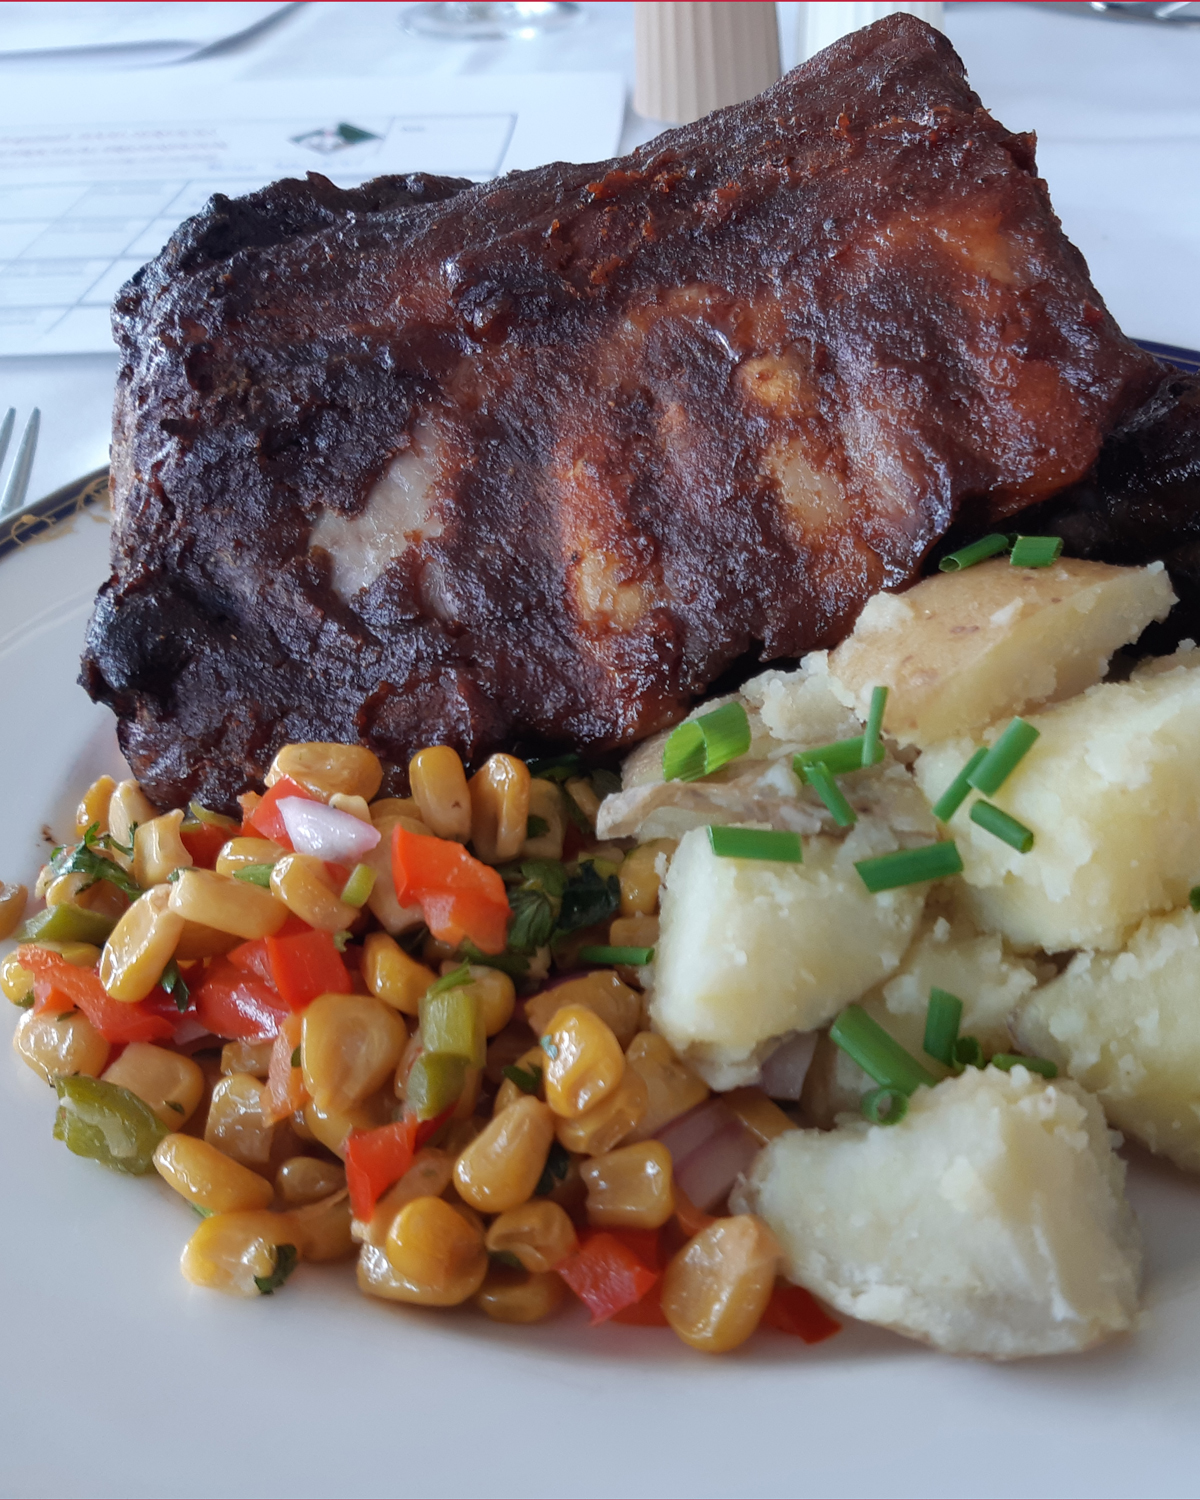 The main course of a Confirmation Dinner served by Sailor 2nd Class Trey Pennington at Venture Galley, which included slow oven-baked BBQ ribs, shaken garlic potatoes topped with chives, and a grilled corn medley. Photos: Peter Mallett/Lookout Newspaper
